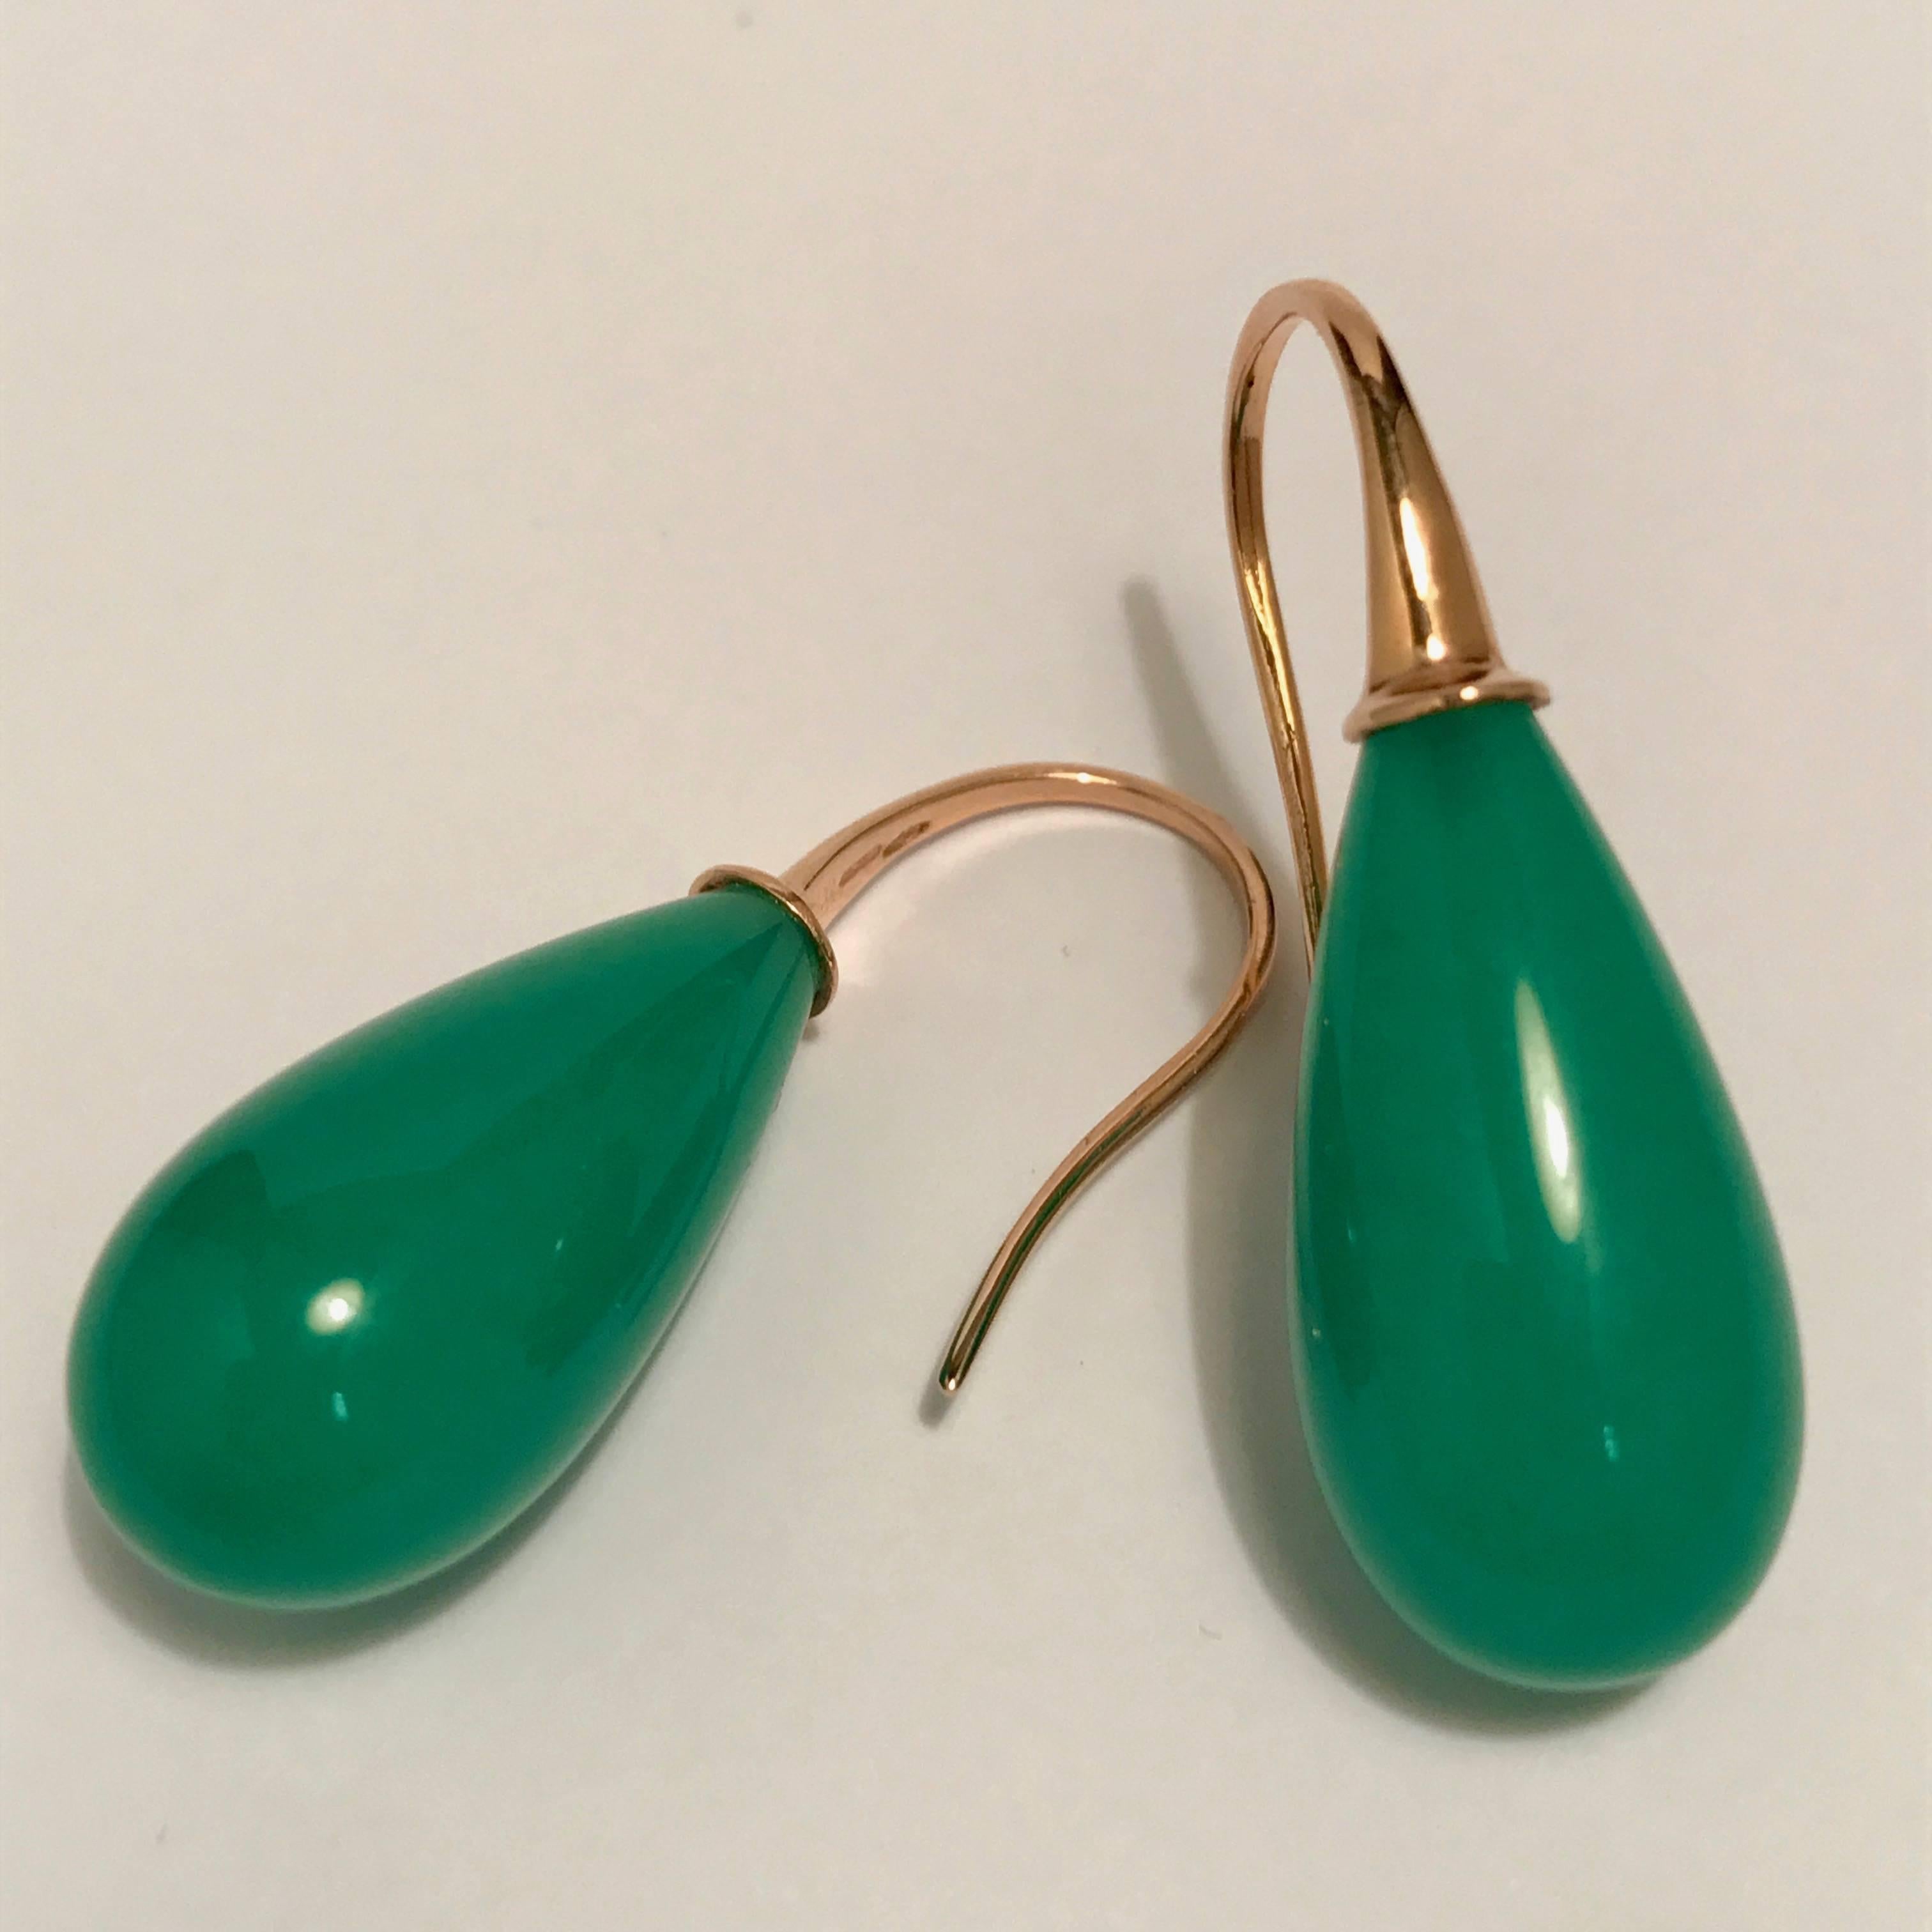 Discover this Jade and Yellow Gold 18K Drop Earrings.
Yellow Gold 18K
Reconstitute Jade